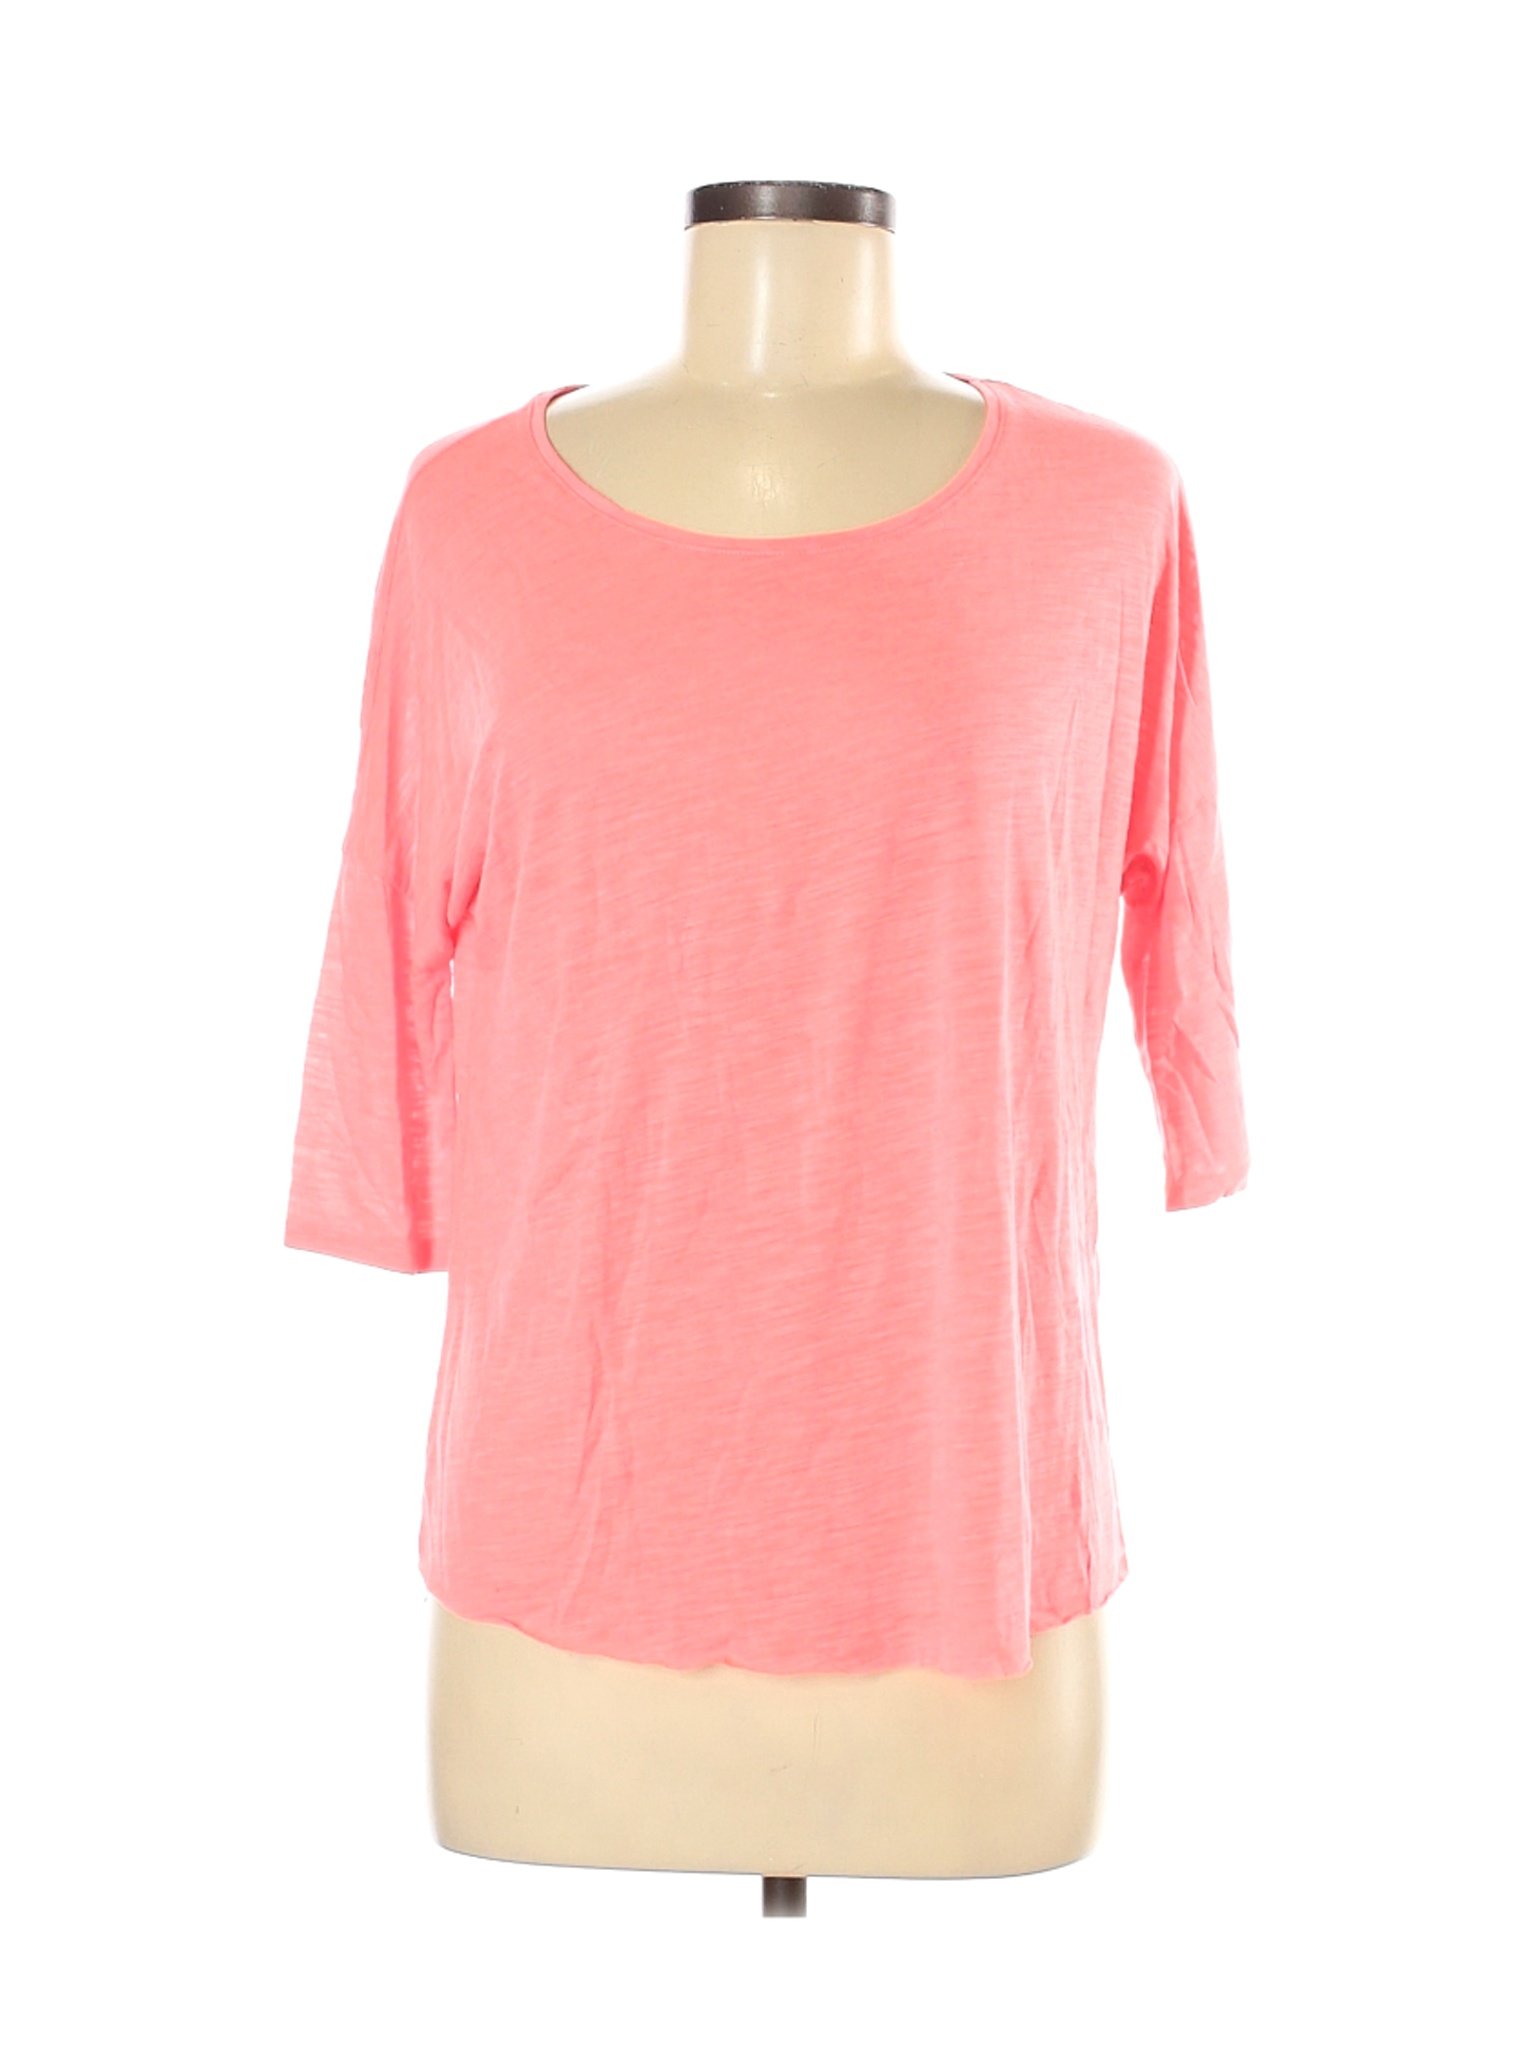 American Eagle Outfitters Women Pink Short Sleeve T-Shirt M | eBay